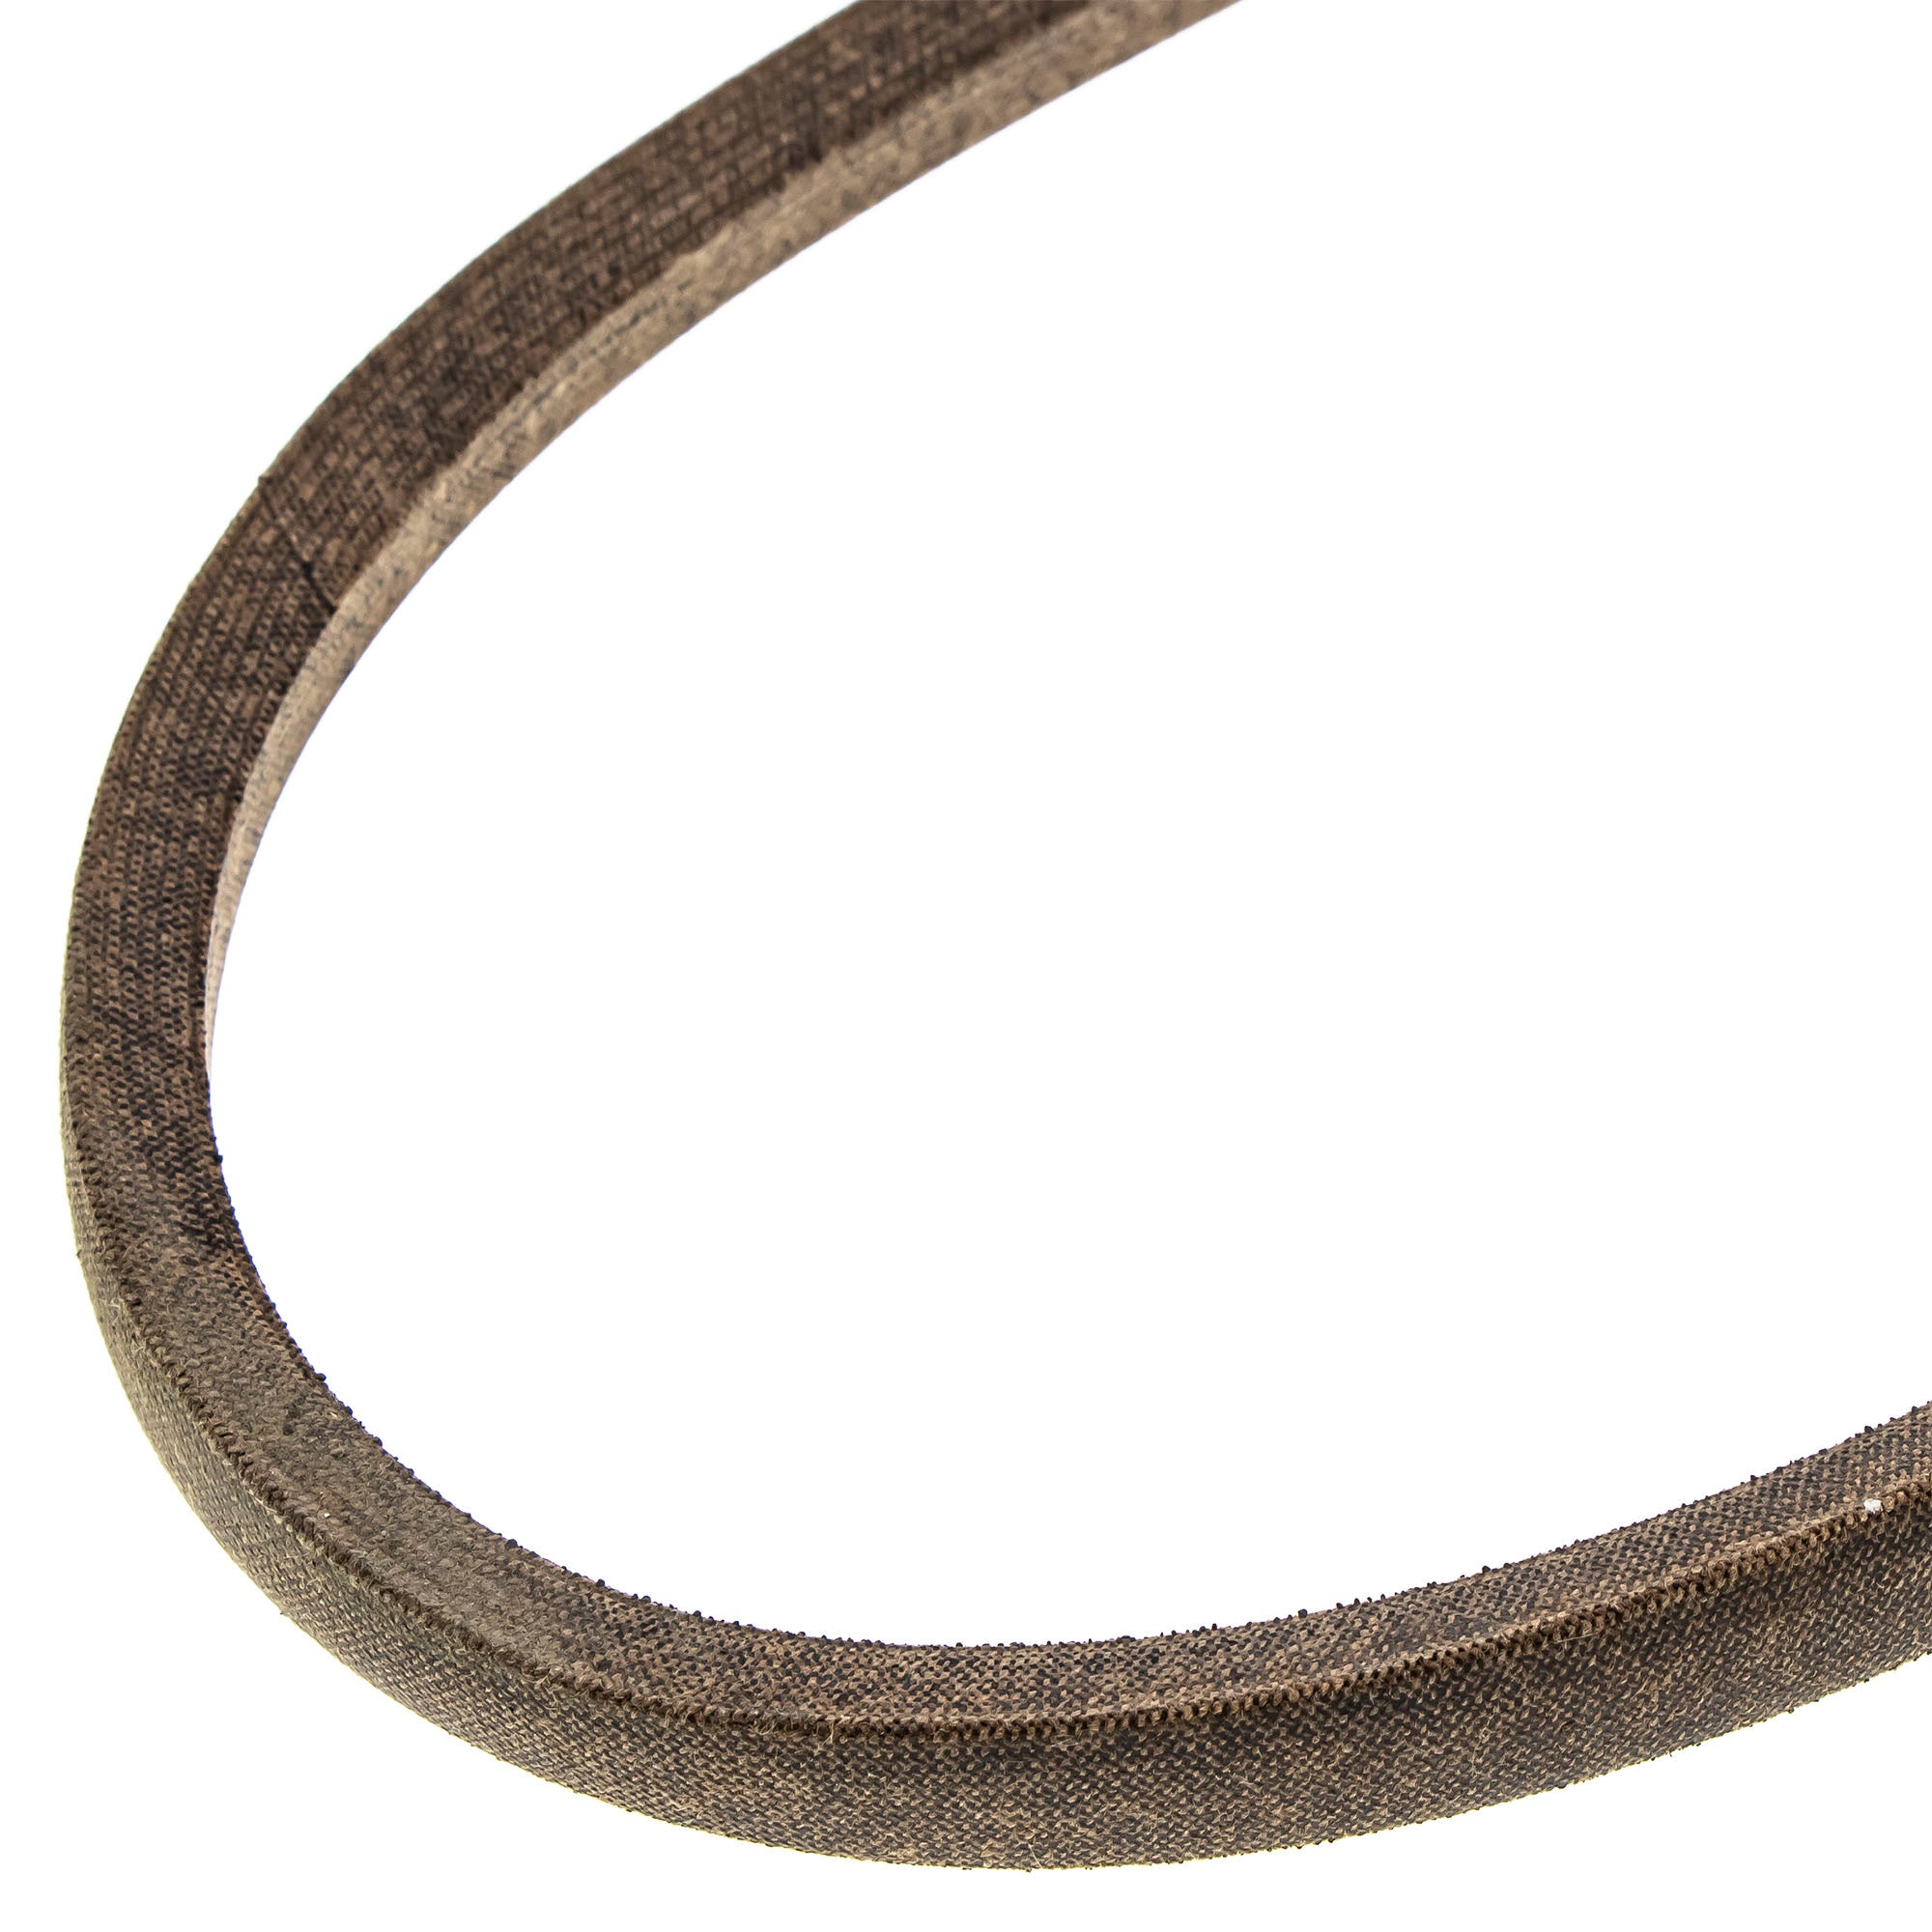 Drive Belt For MTD Cub Cadet White Outdoor 954-0434